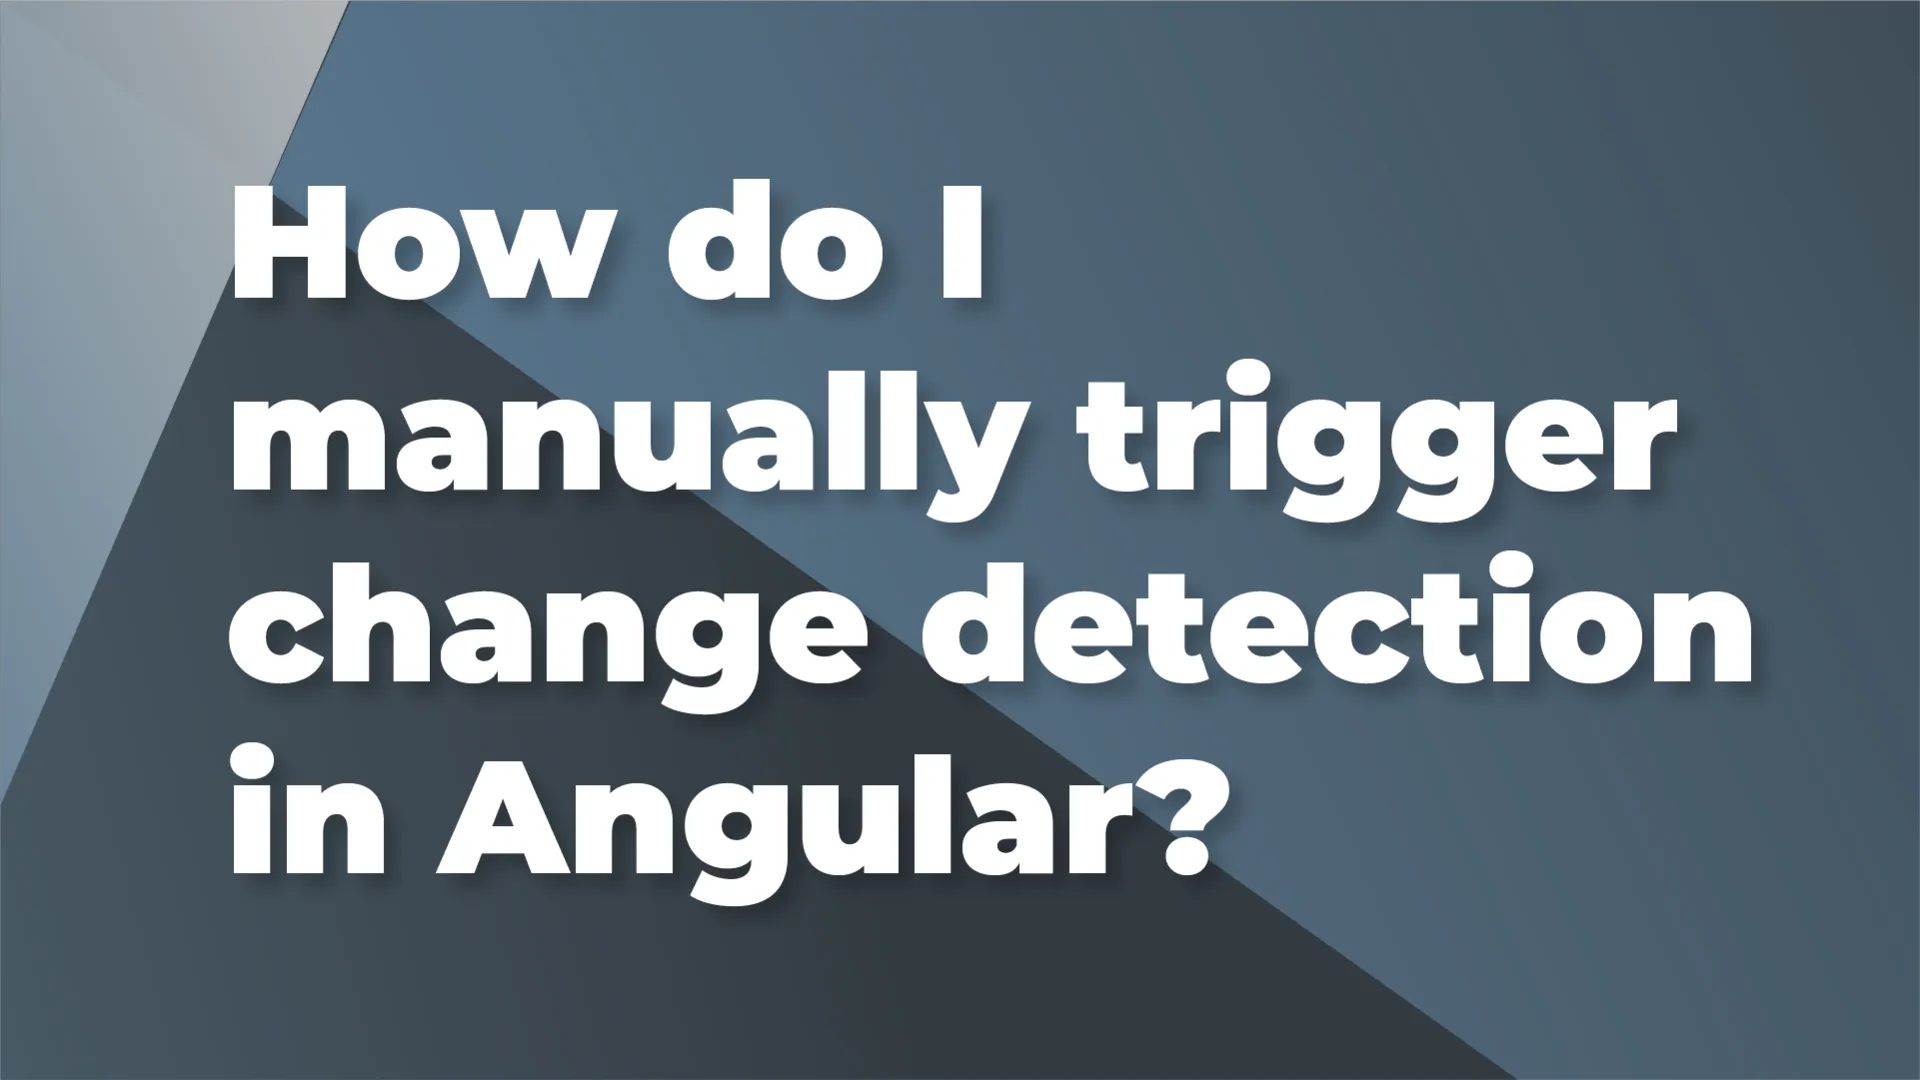 How do I manually trigger change detection in Angular?